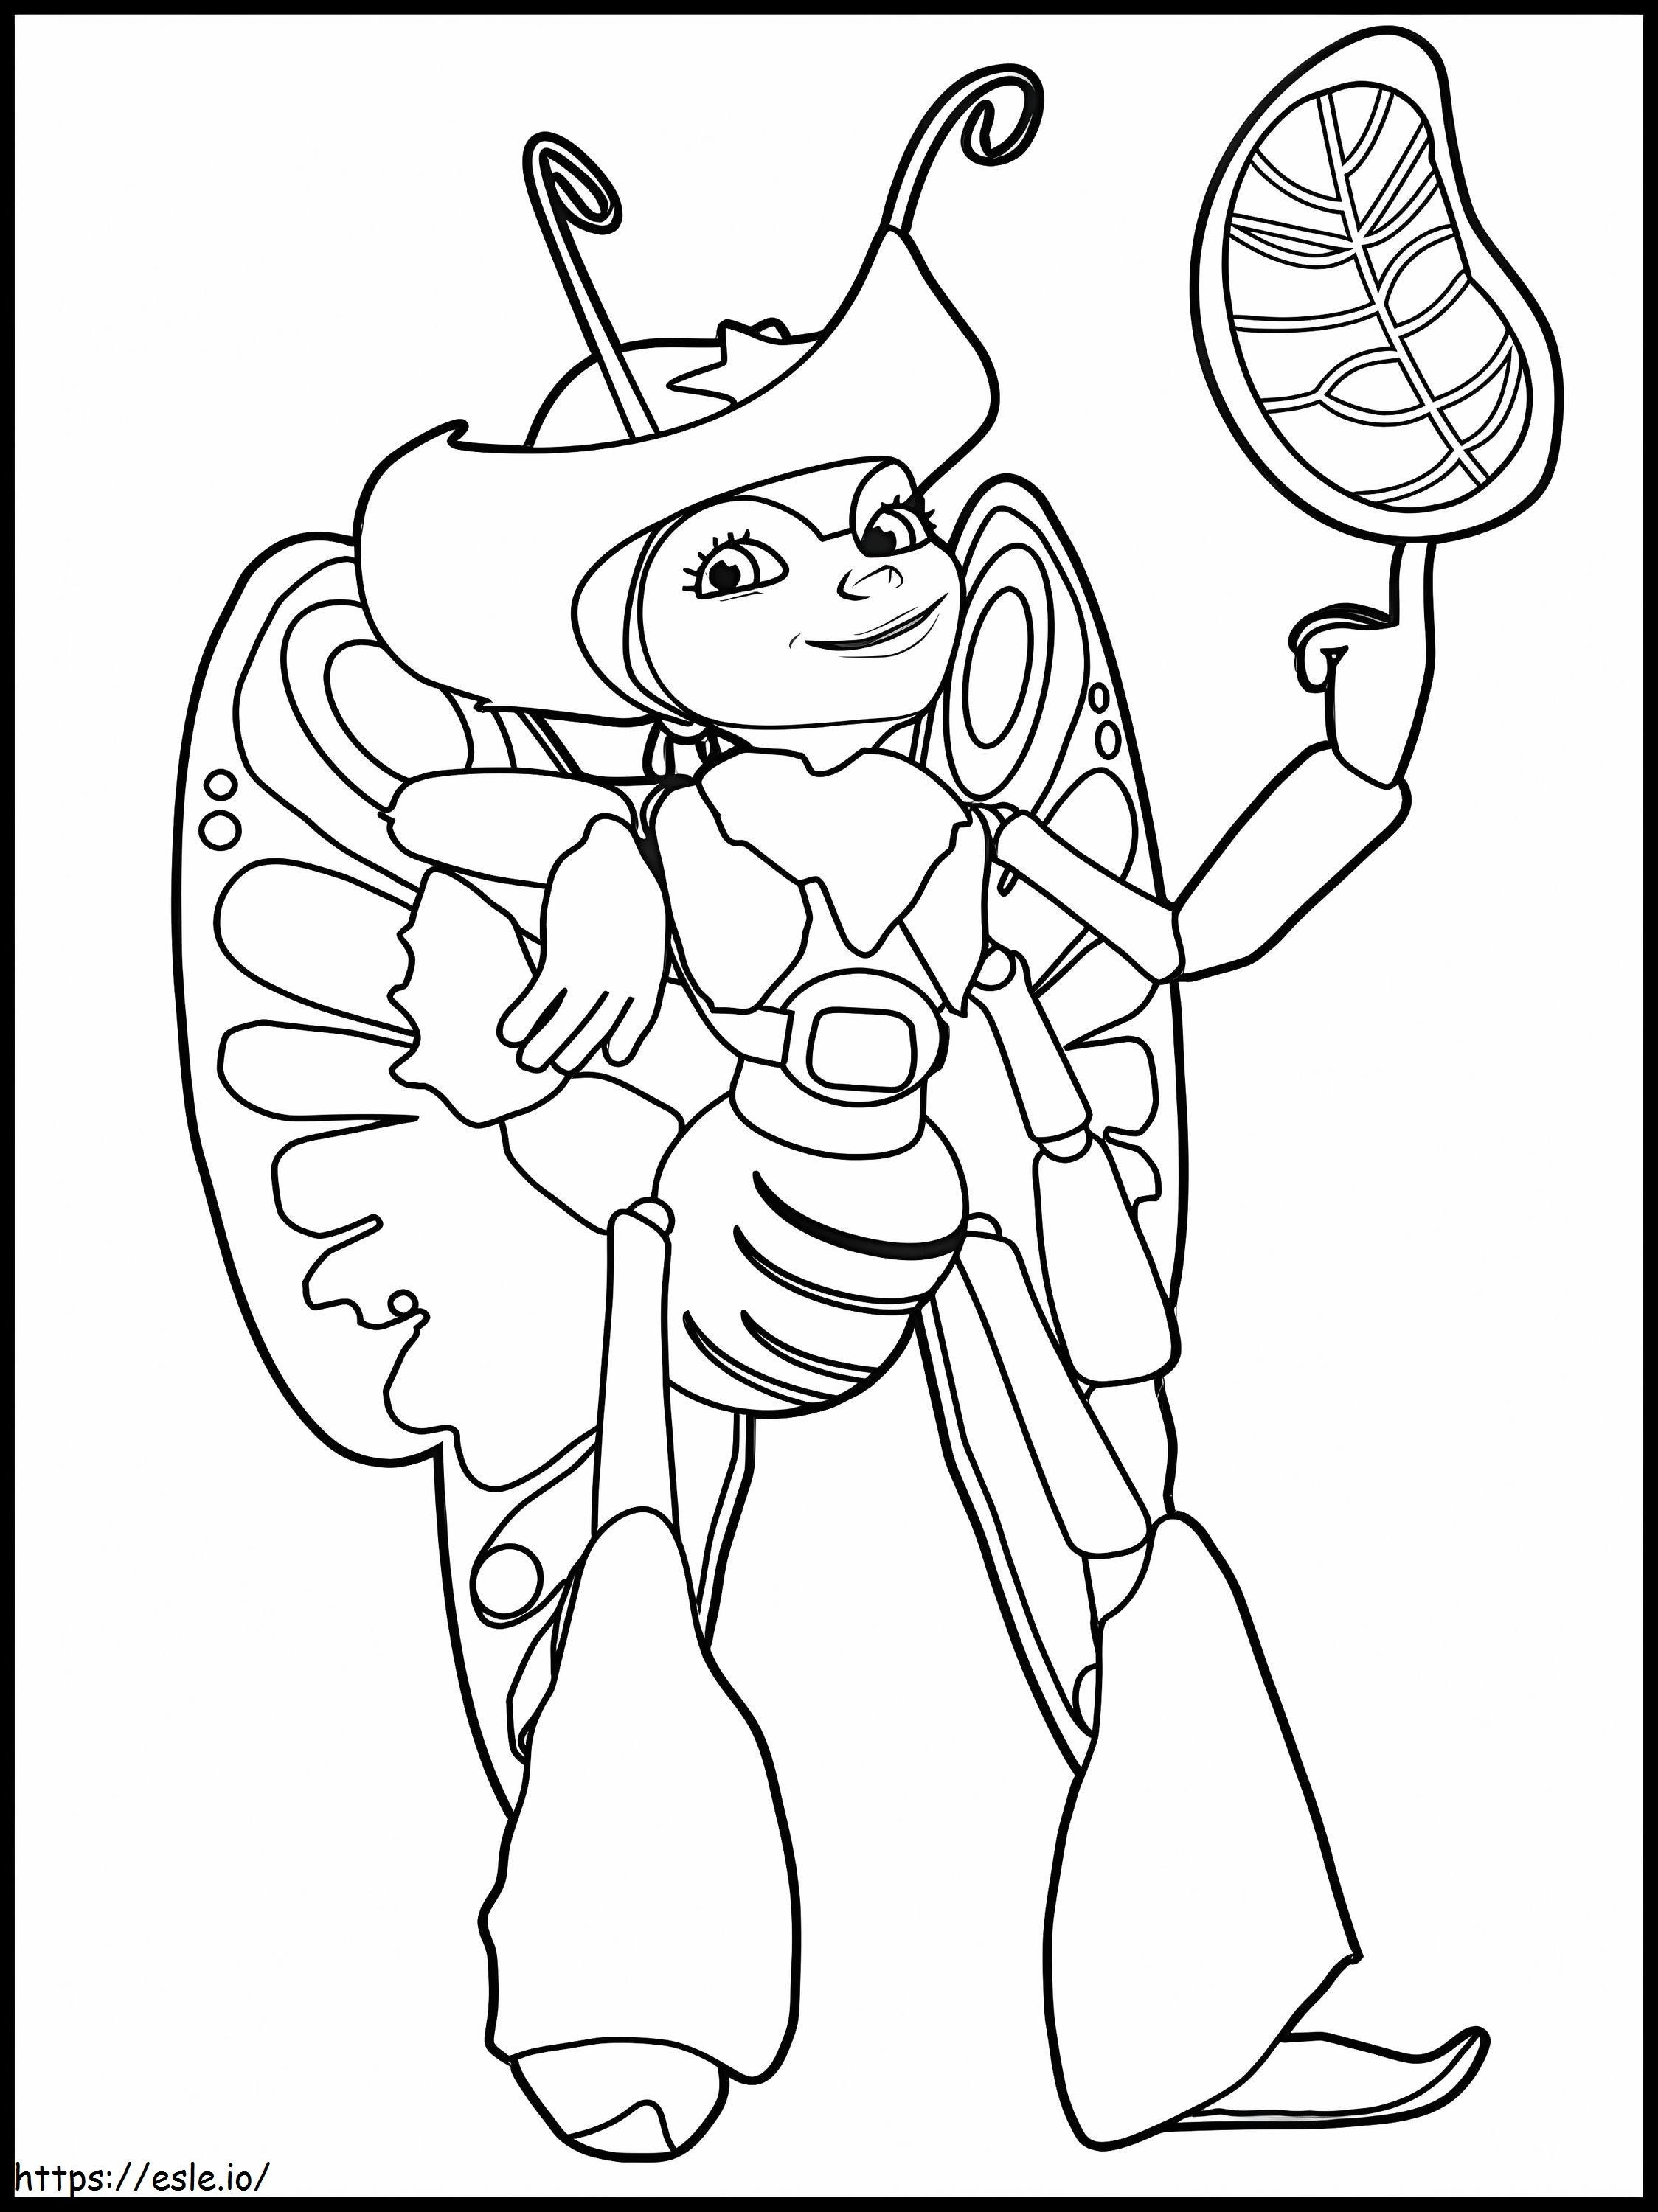 1583461877 3 coloring page